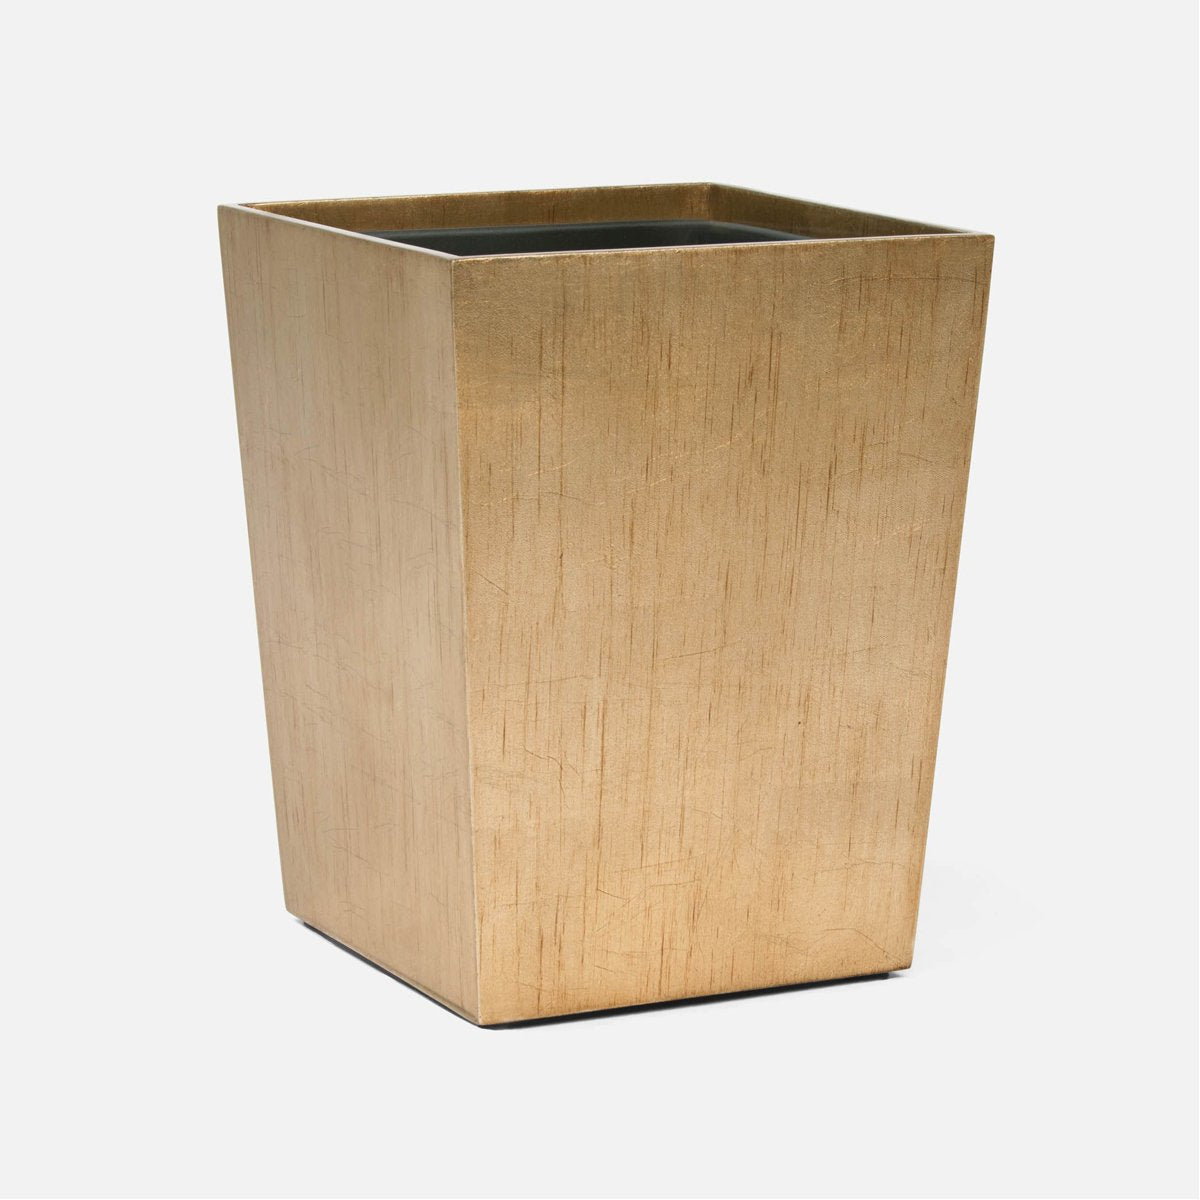 Pigeon and Poodle Tanlay Square Wastebasket, Tapered